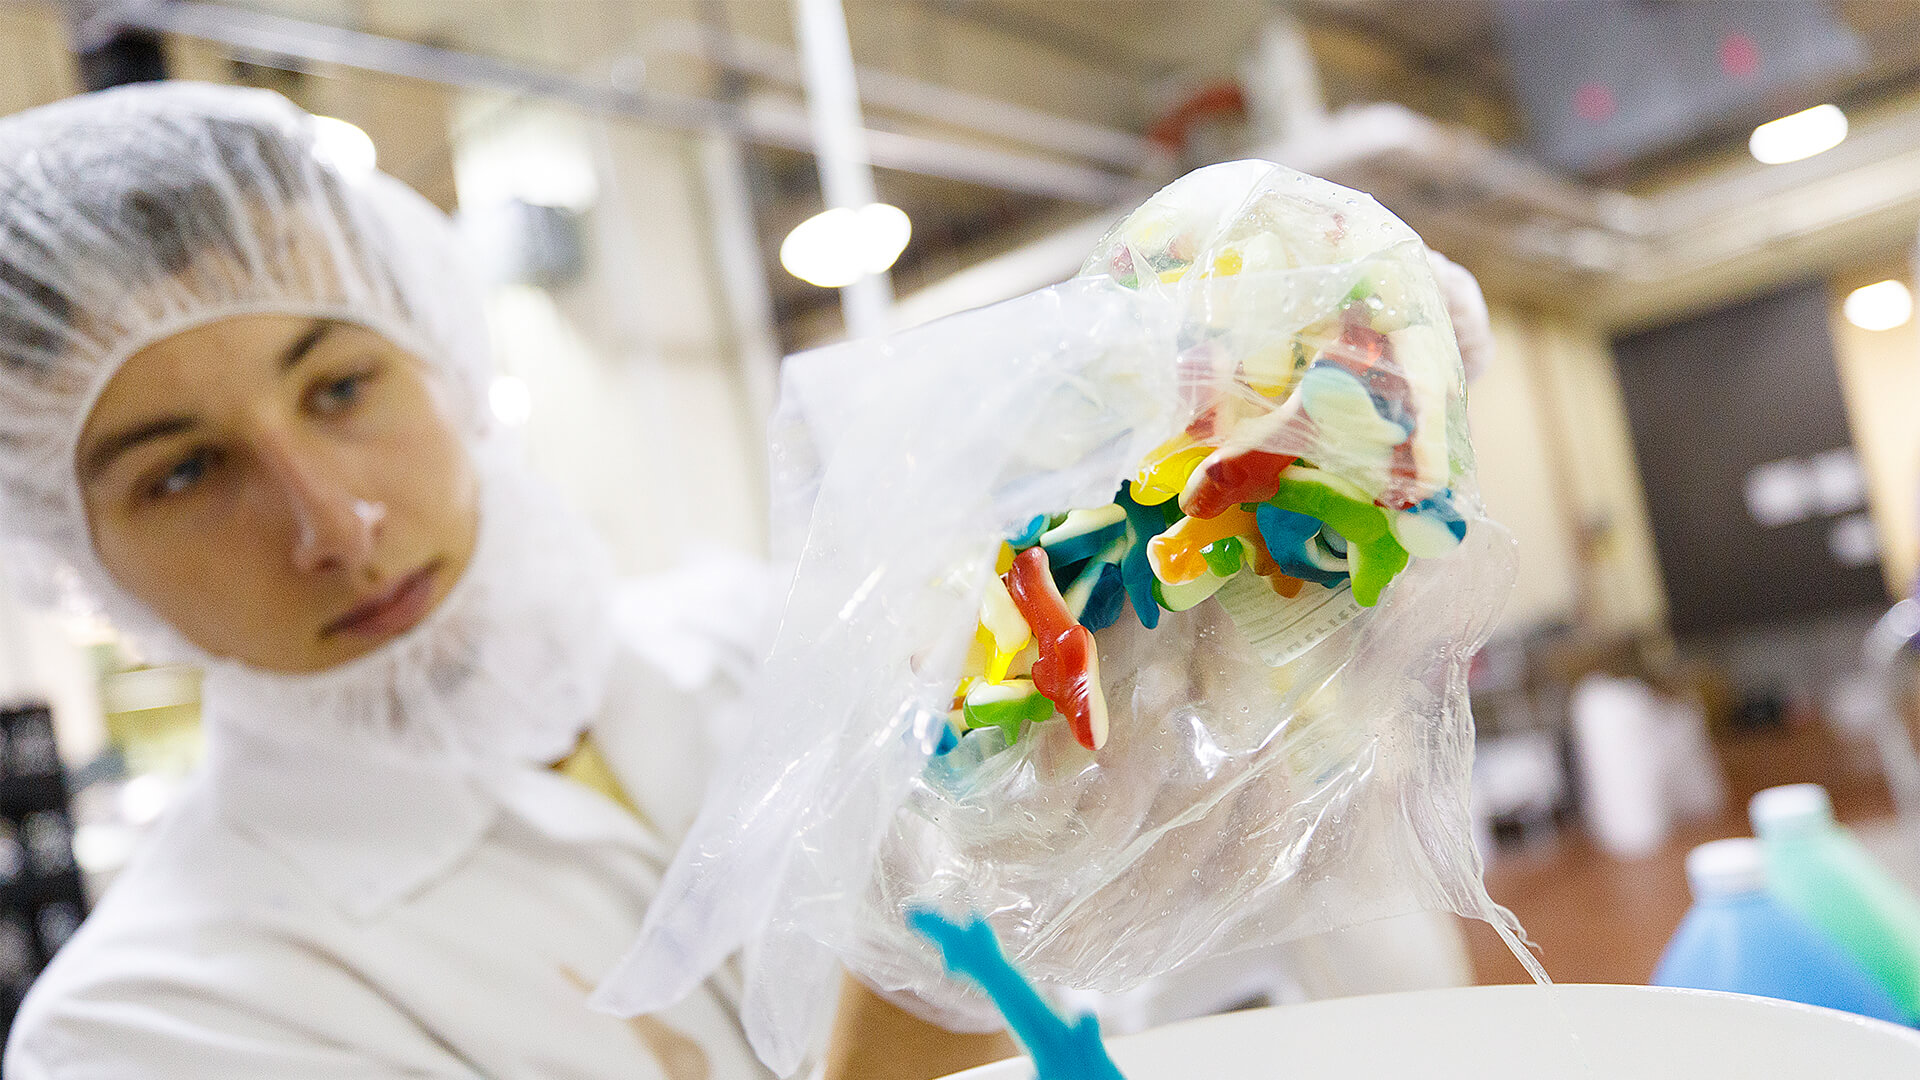 Student researcher dropping colorful gelatin fish into a bucket